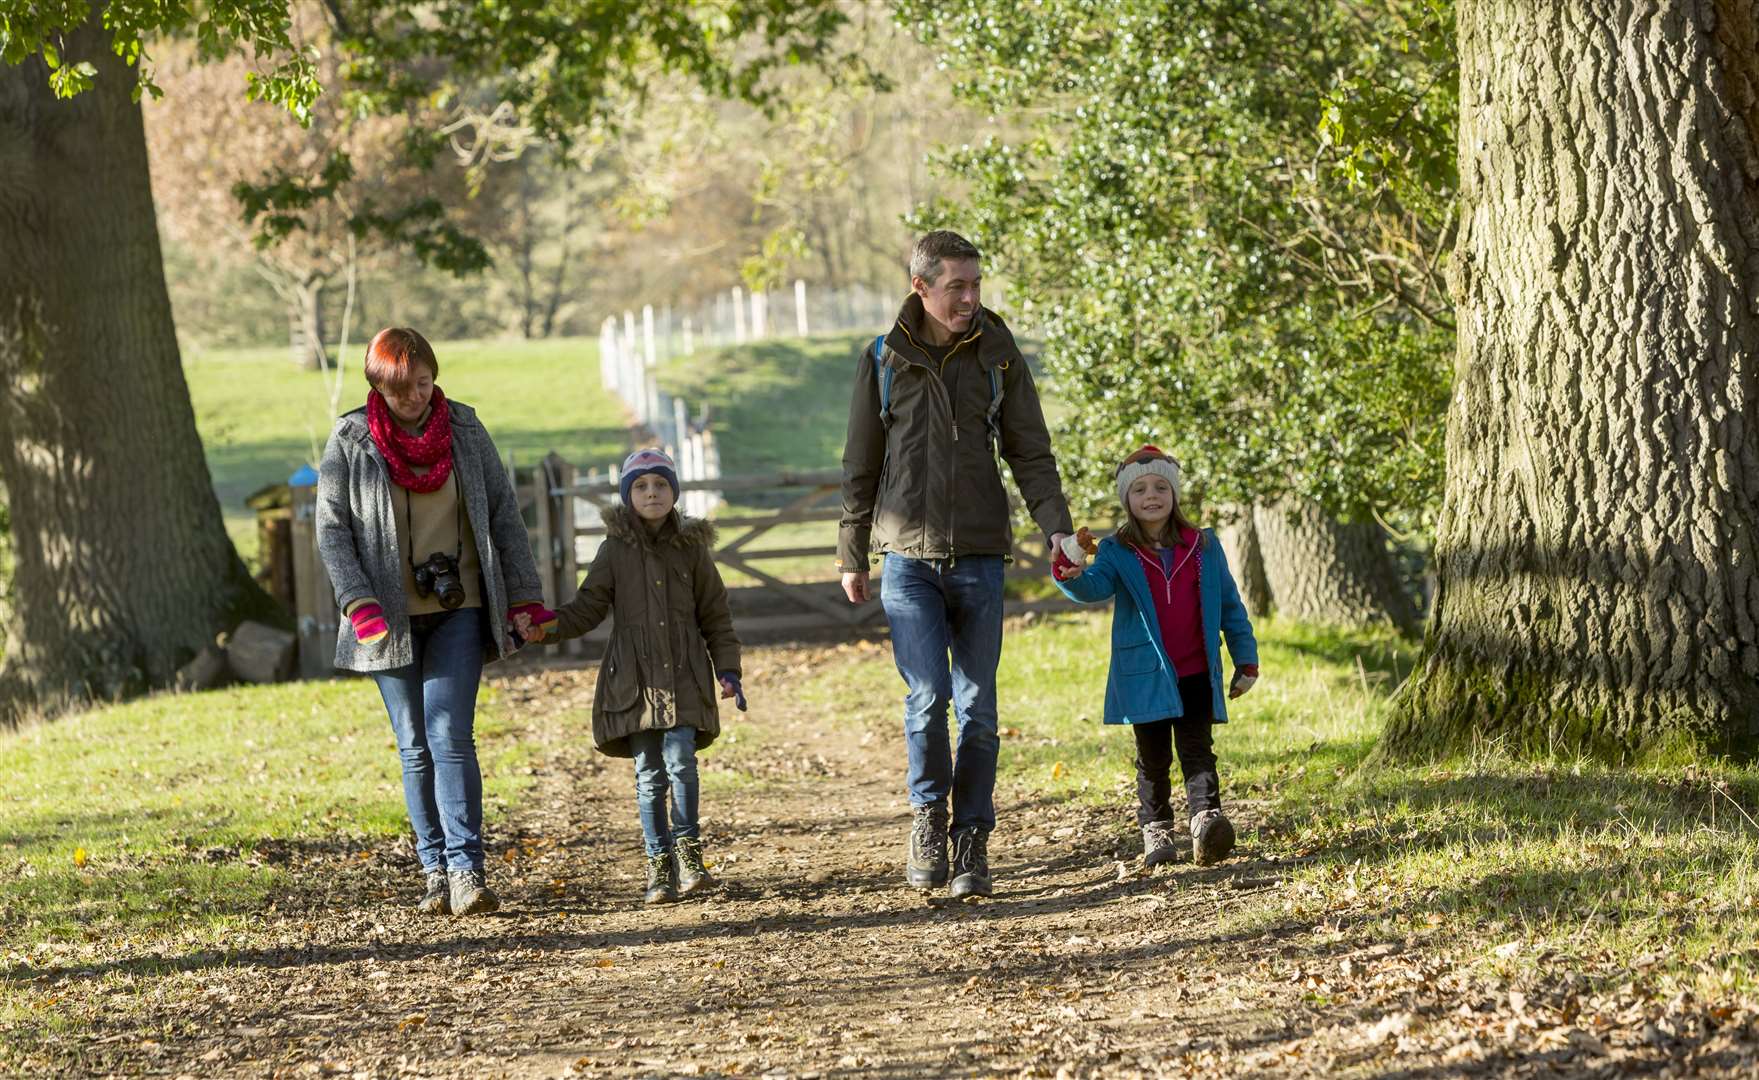 Enjoy a family day out at one of Kent’s National Trust properties this October half term. Picture: National Trust Images / John Miller